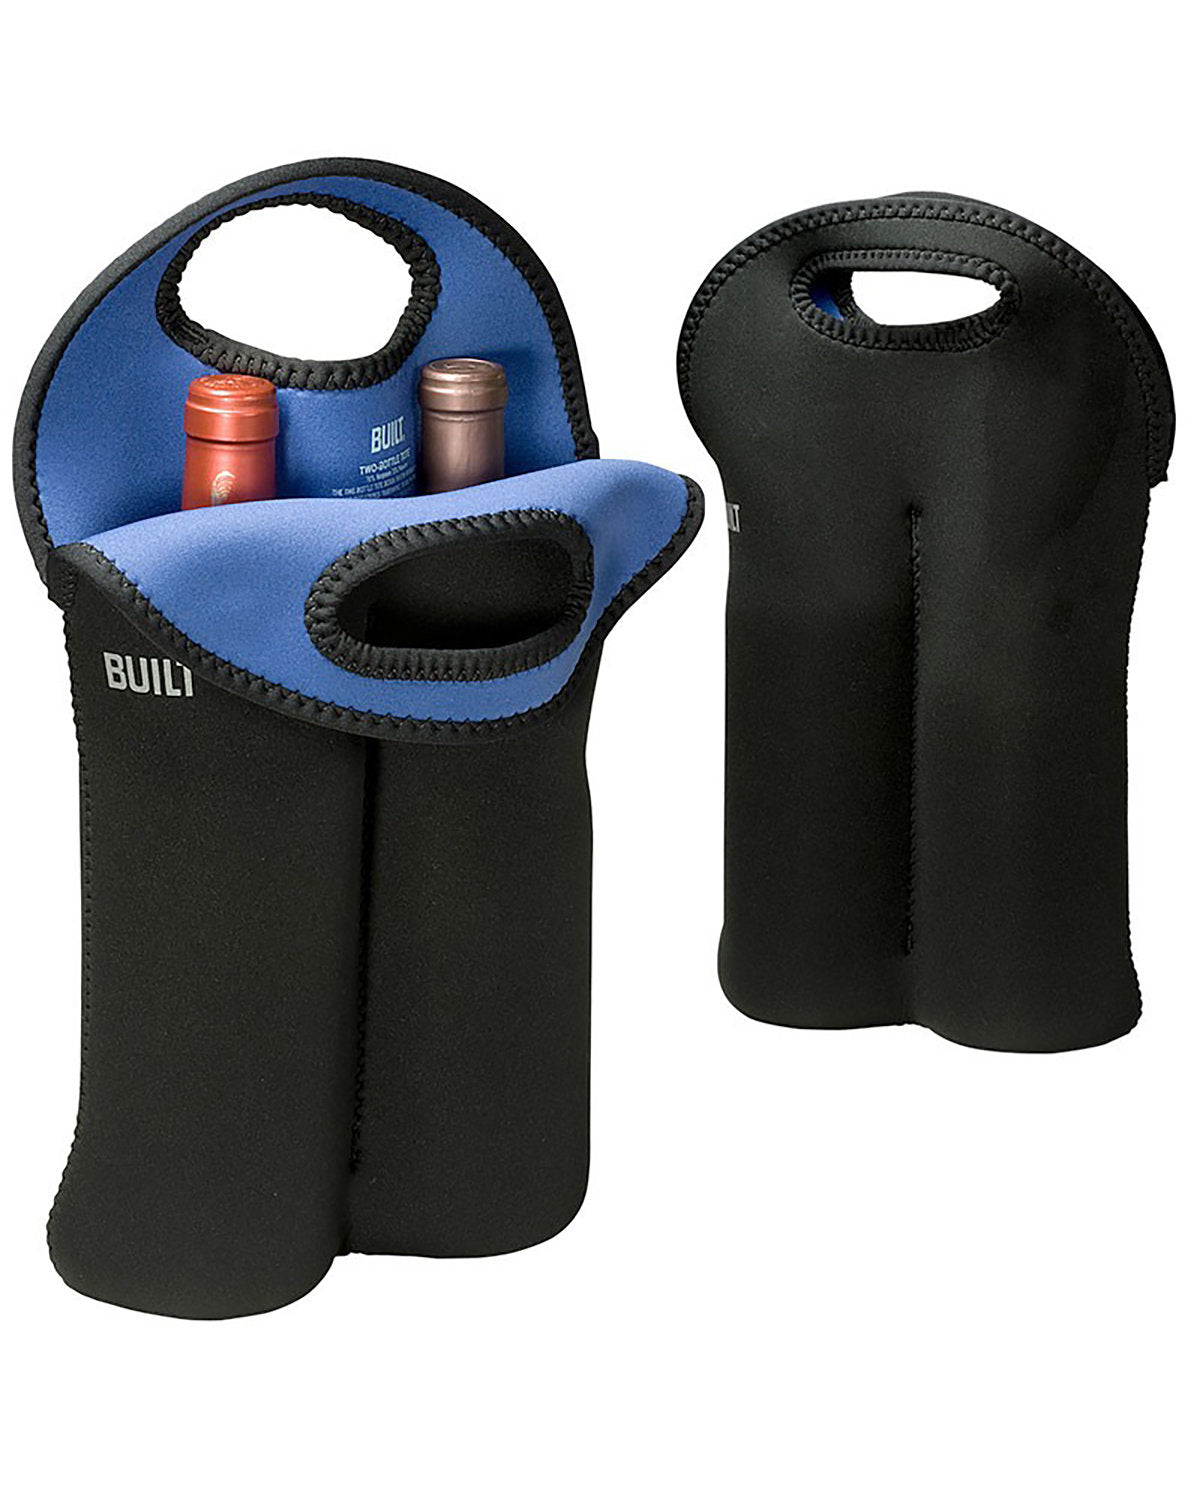 # Two Bottle Tote